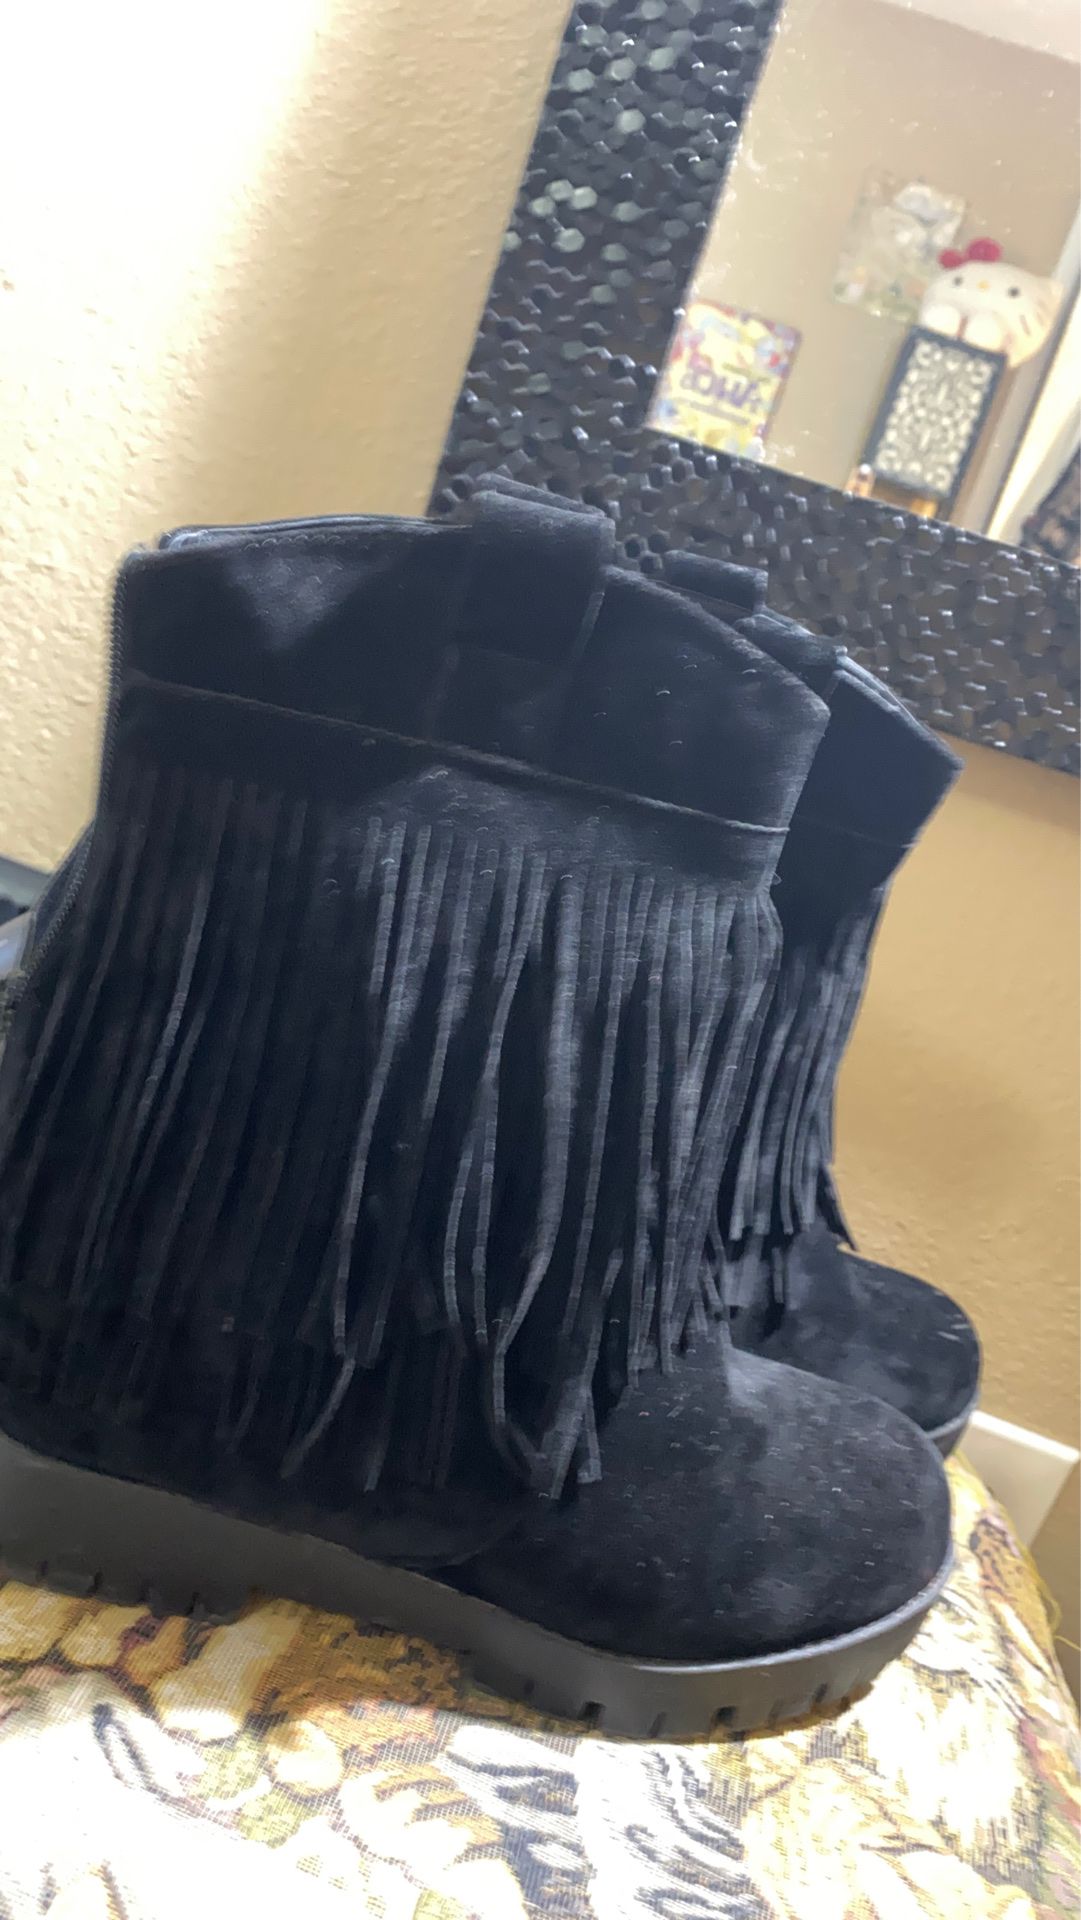 Black Fringe (Suede type material) size 9